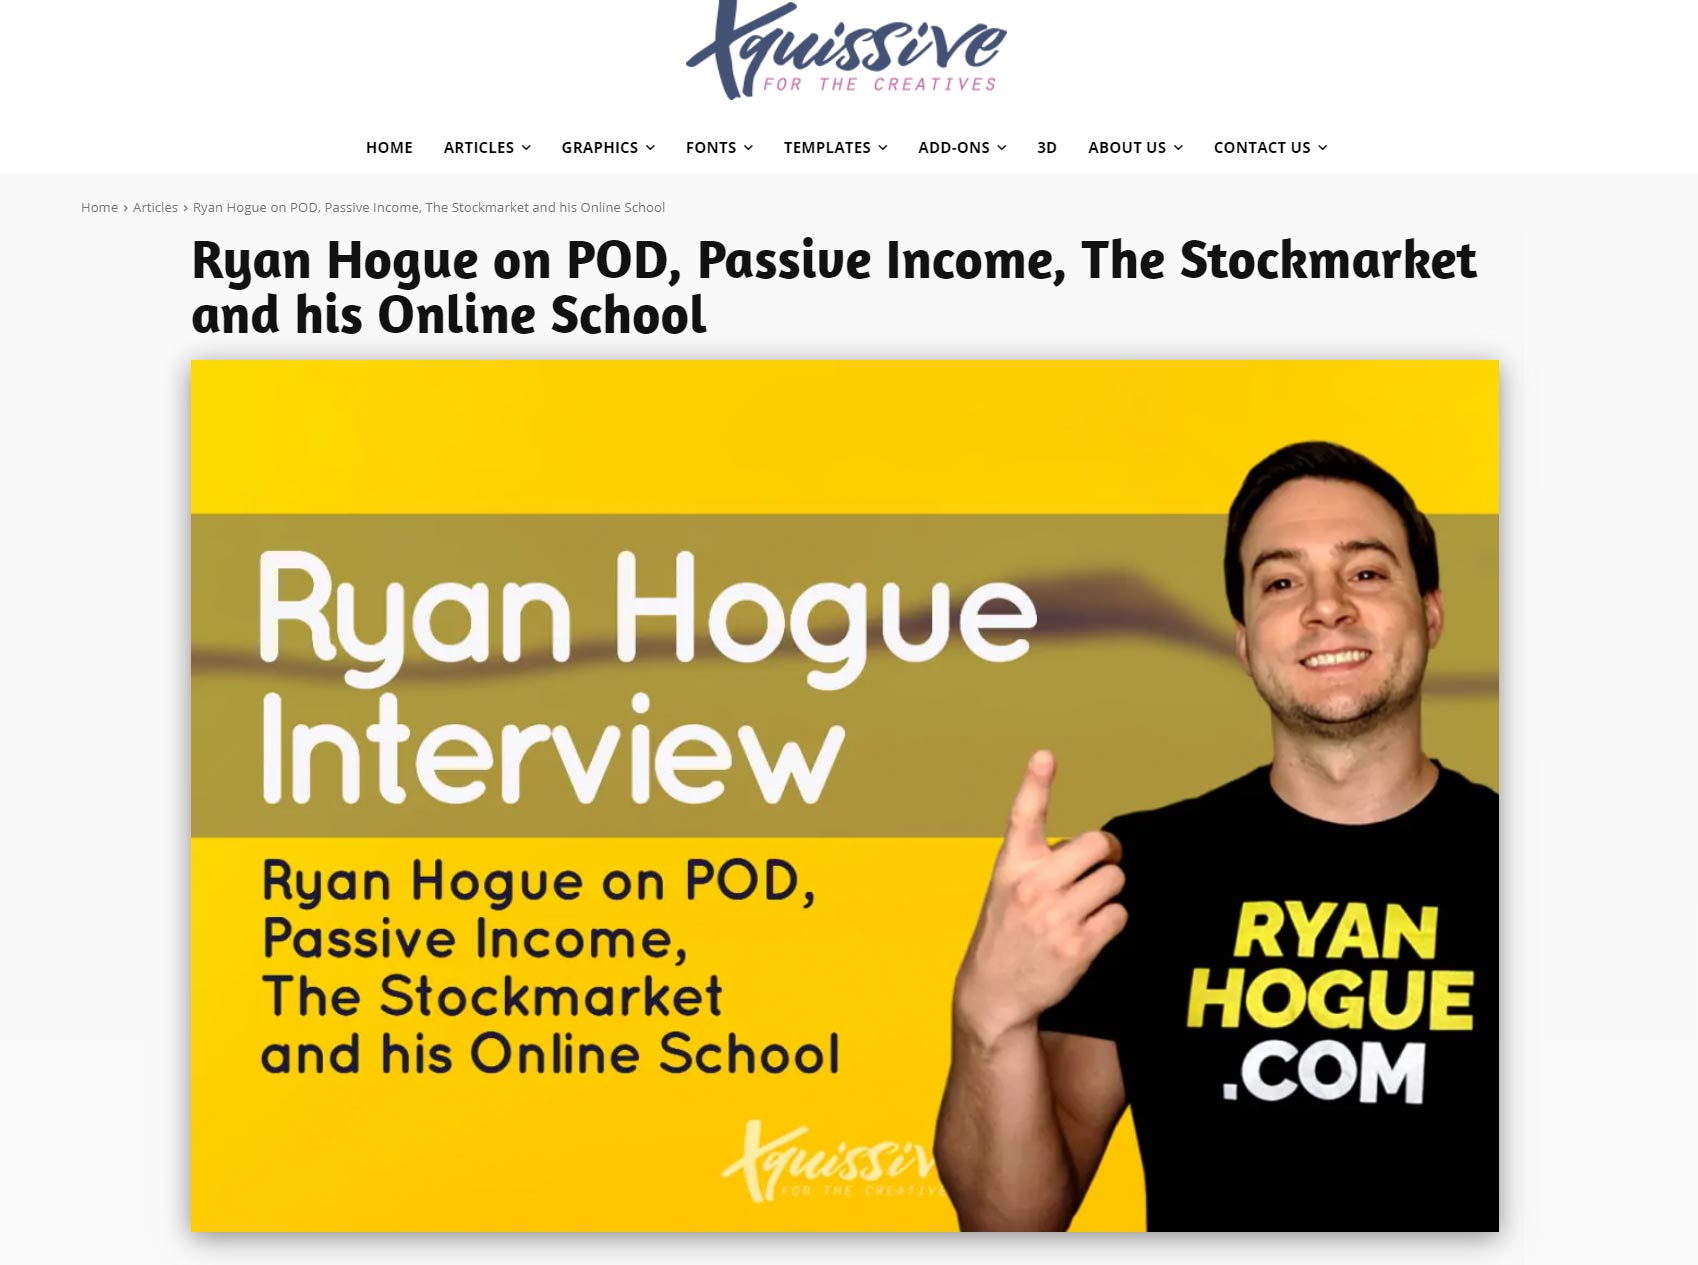 Ryan Hogue featured on Xquissive June 11, 2021